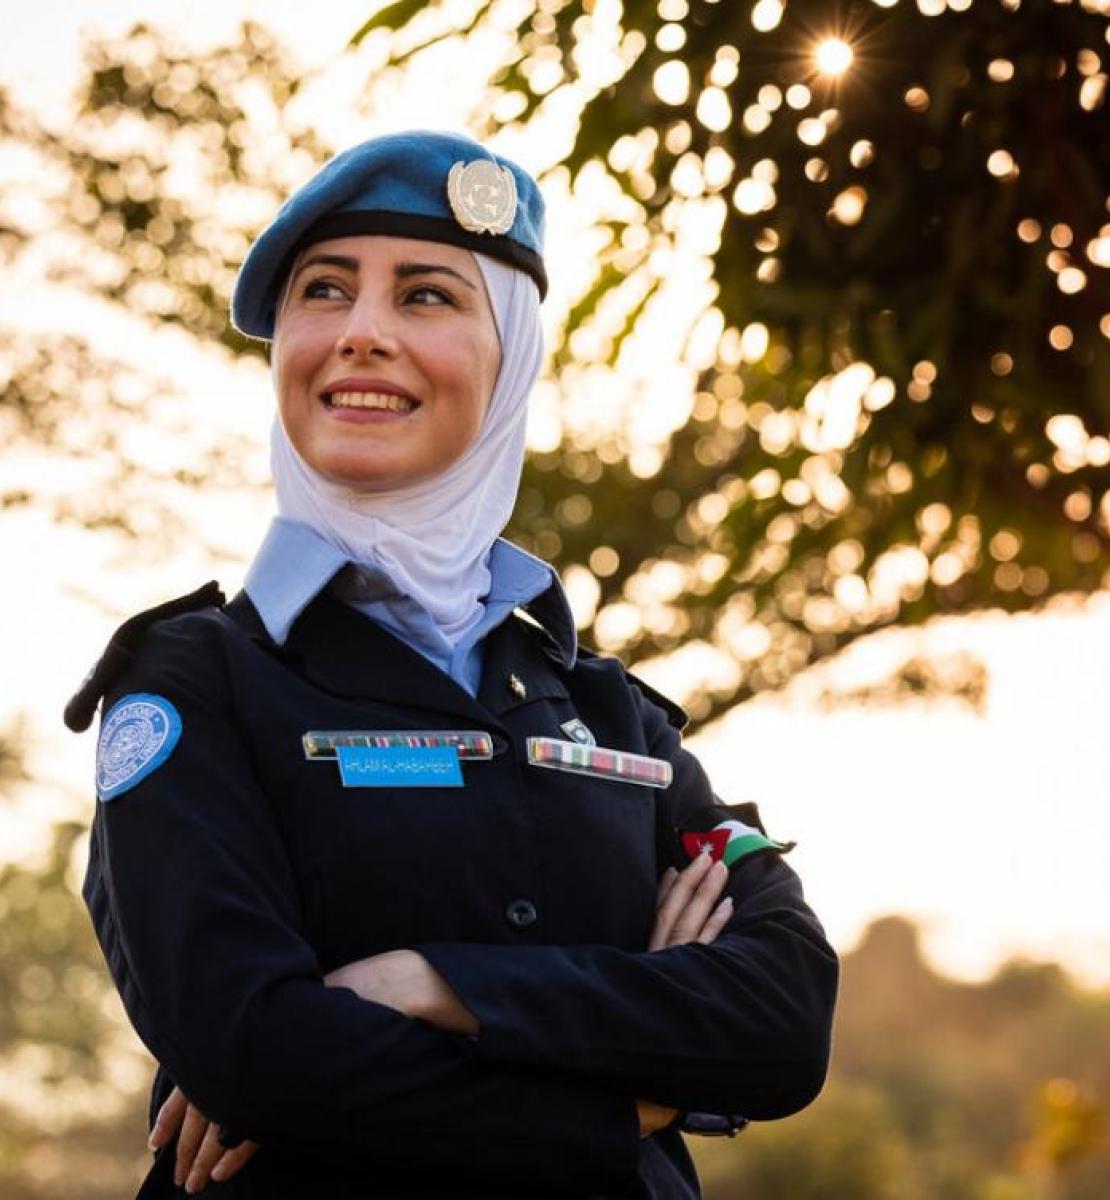 Captain Ahlam Al-Habahbeh proudly wearing her uniform poses for the camera outside standing near a tree. 